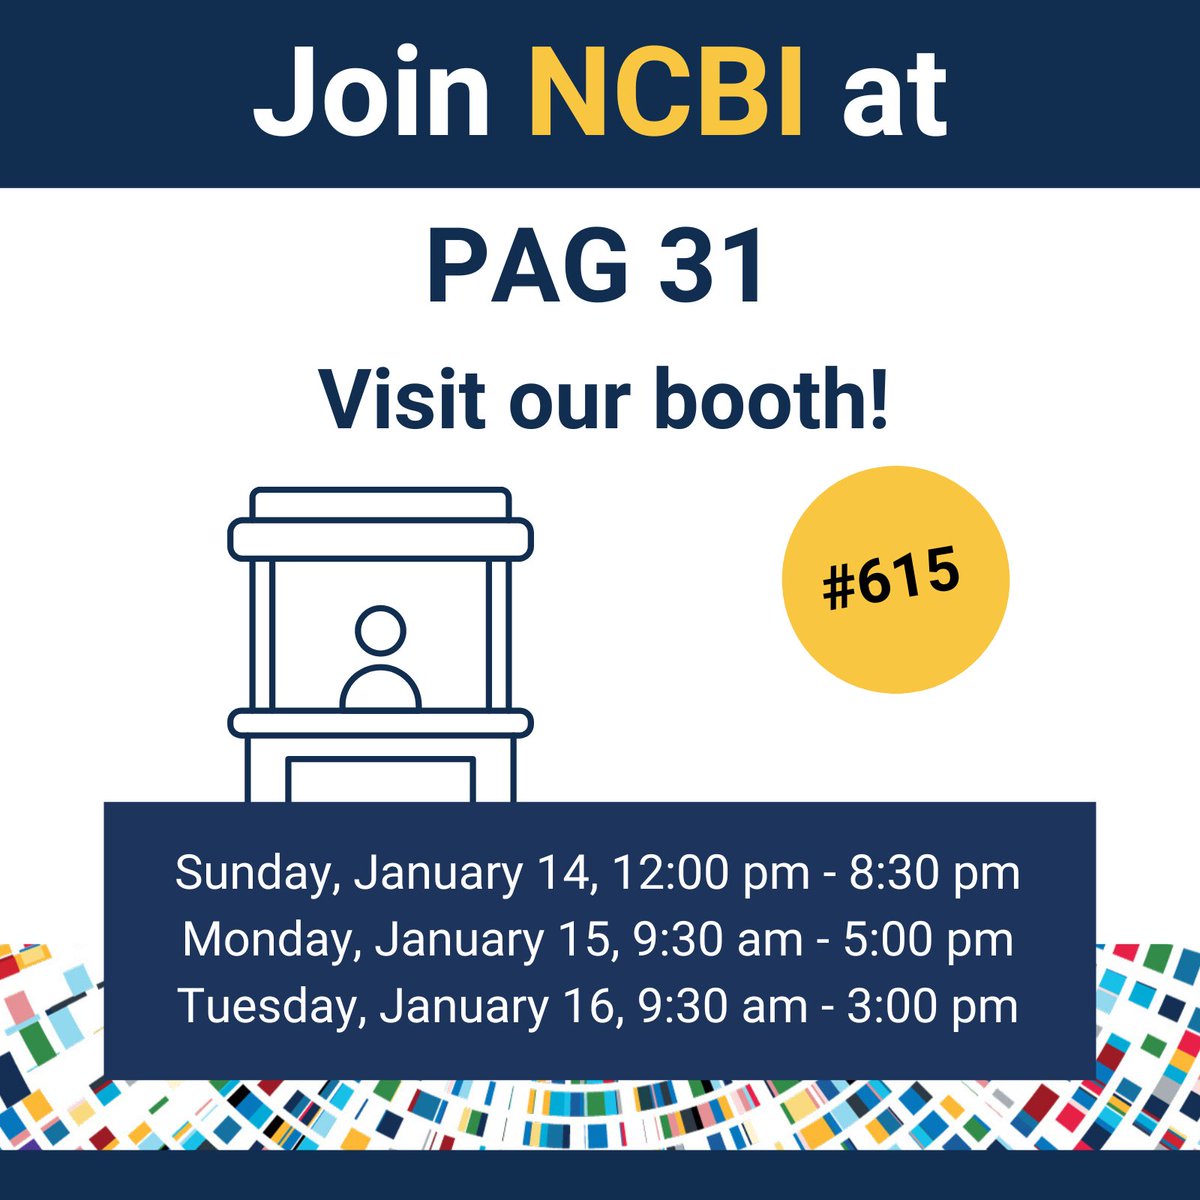 Get ready for #PAG31 in San Diego! Stop by booth #615 to learn about NCBI products and services and chat with our staff. Check out our schedule of events: ow.ly/VQWl50QmCSC